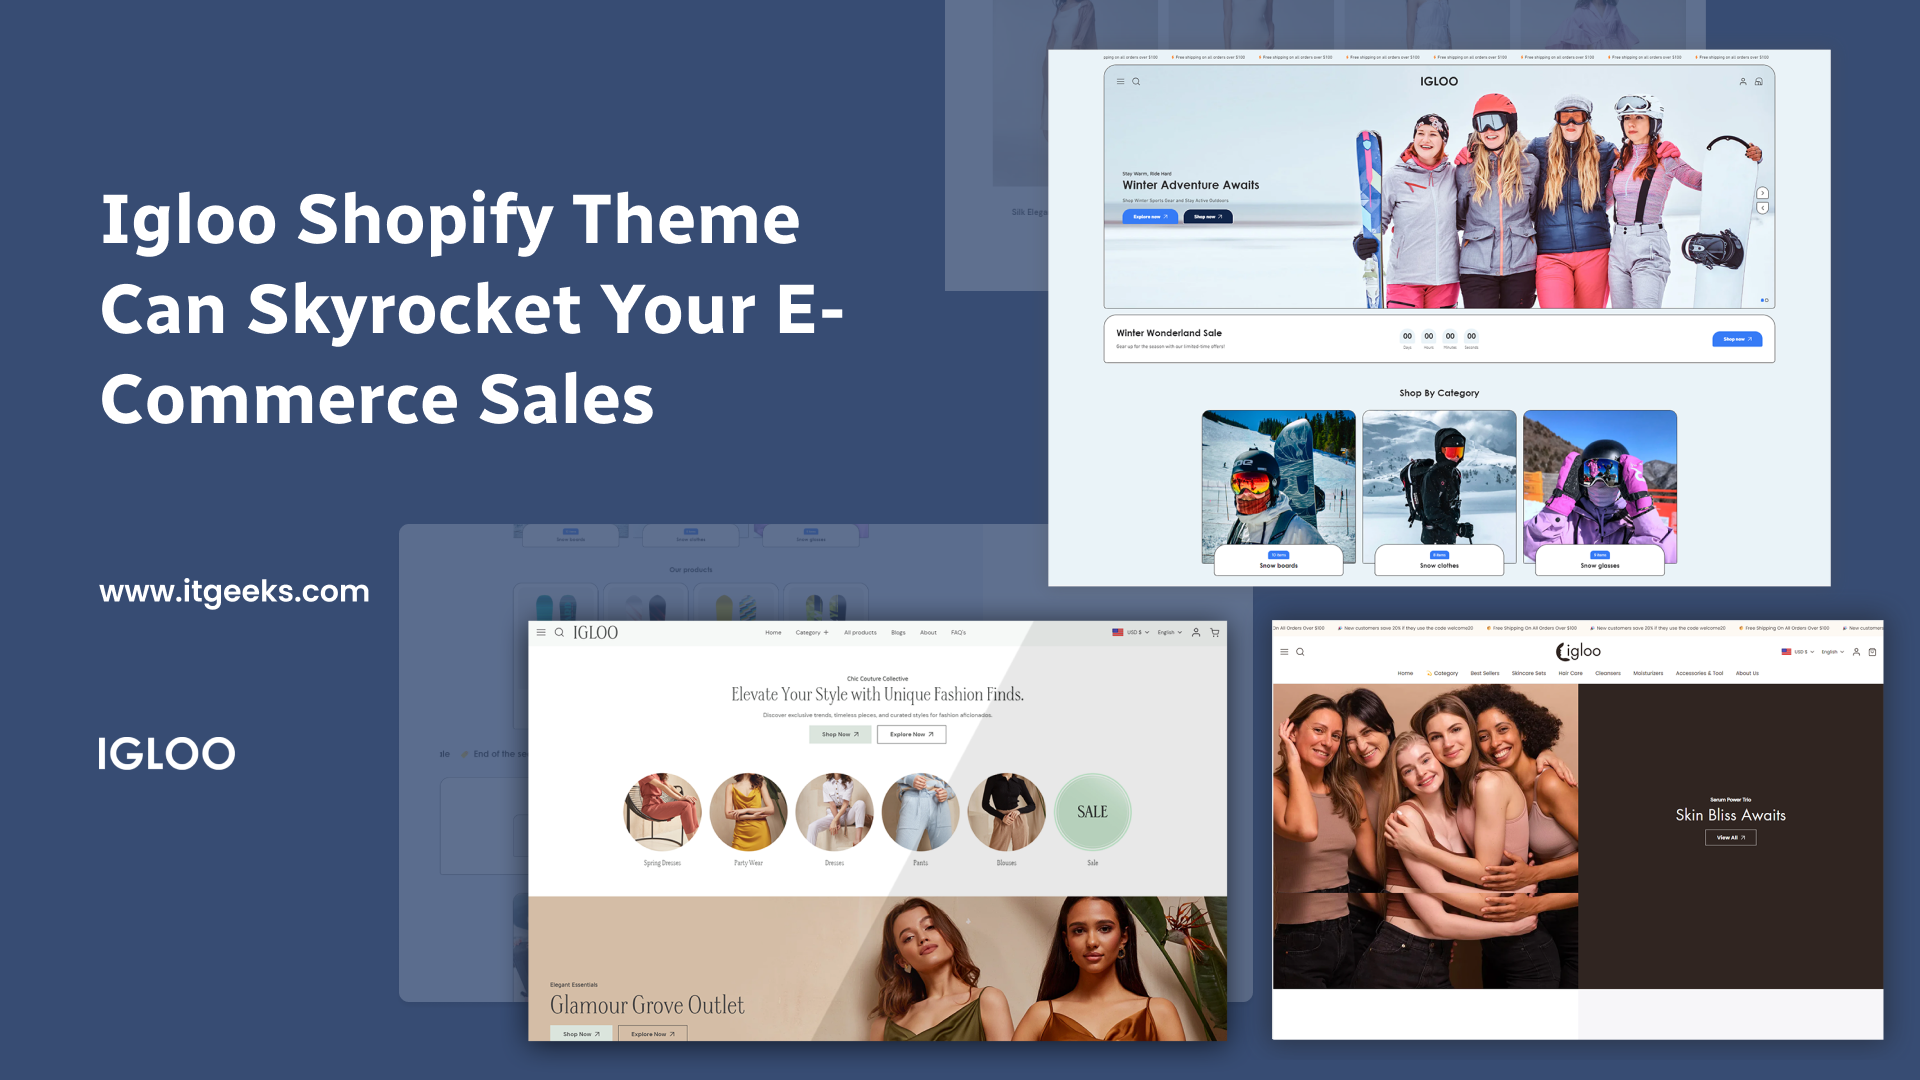 Igloo Shopify Theme Can Skyrocket Your E-Commerce Sales